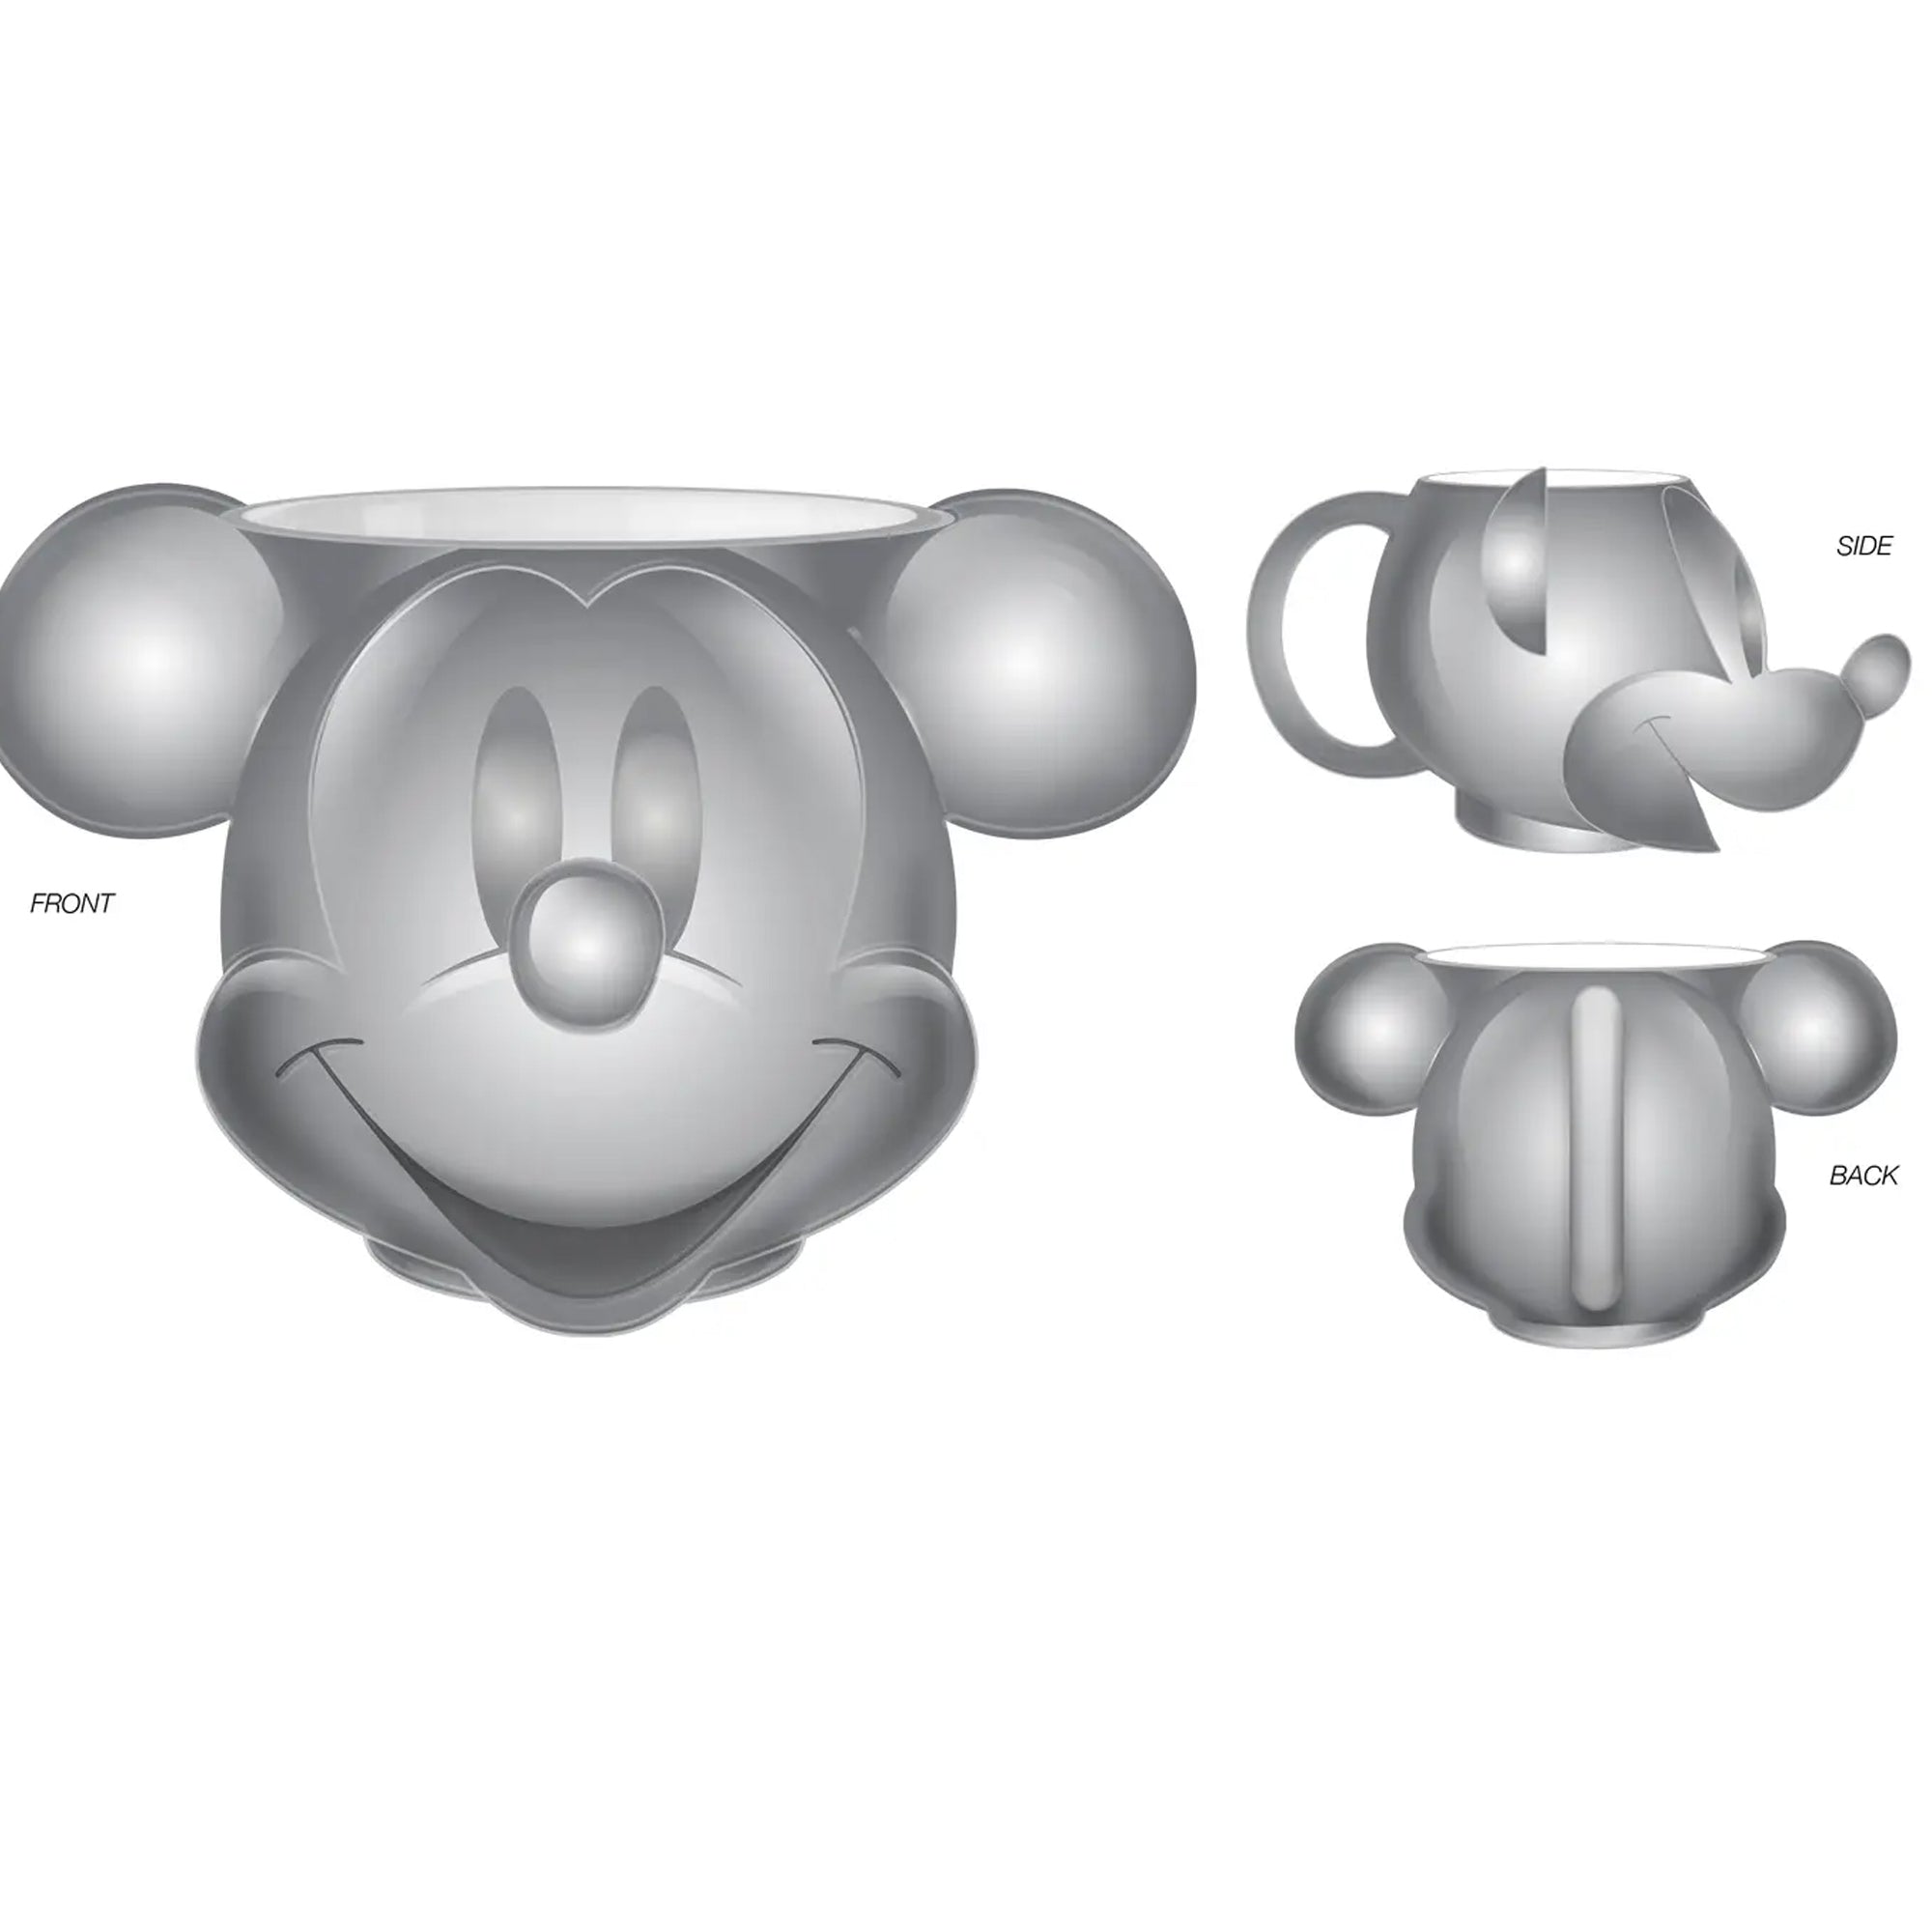 Mickey Mouse Disney Pose 4-Pack 15oz Color Changing Cups 